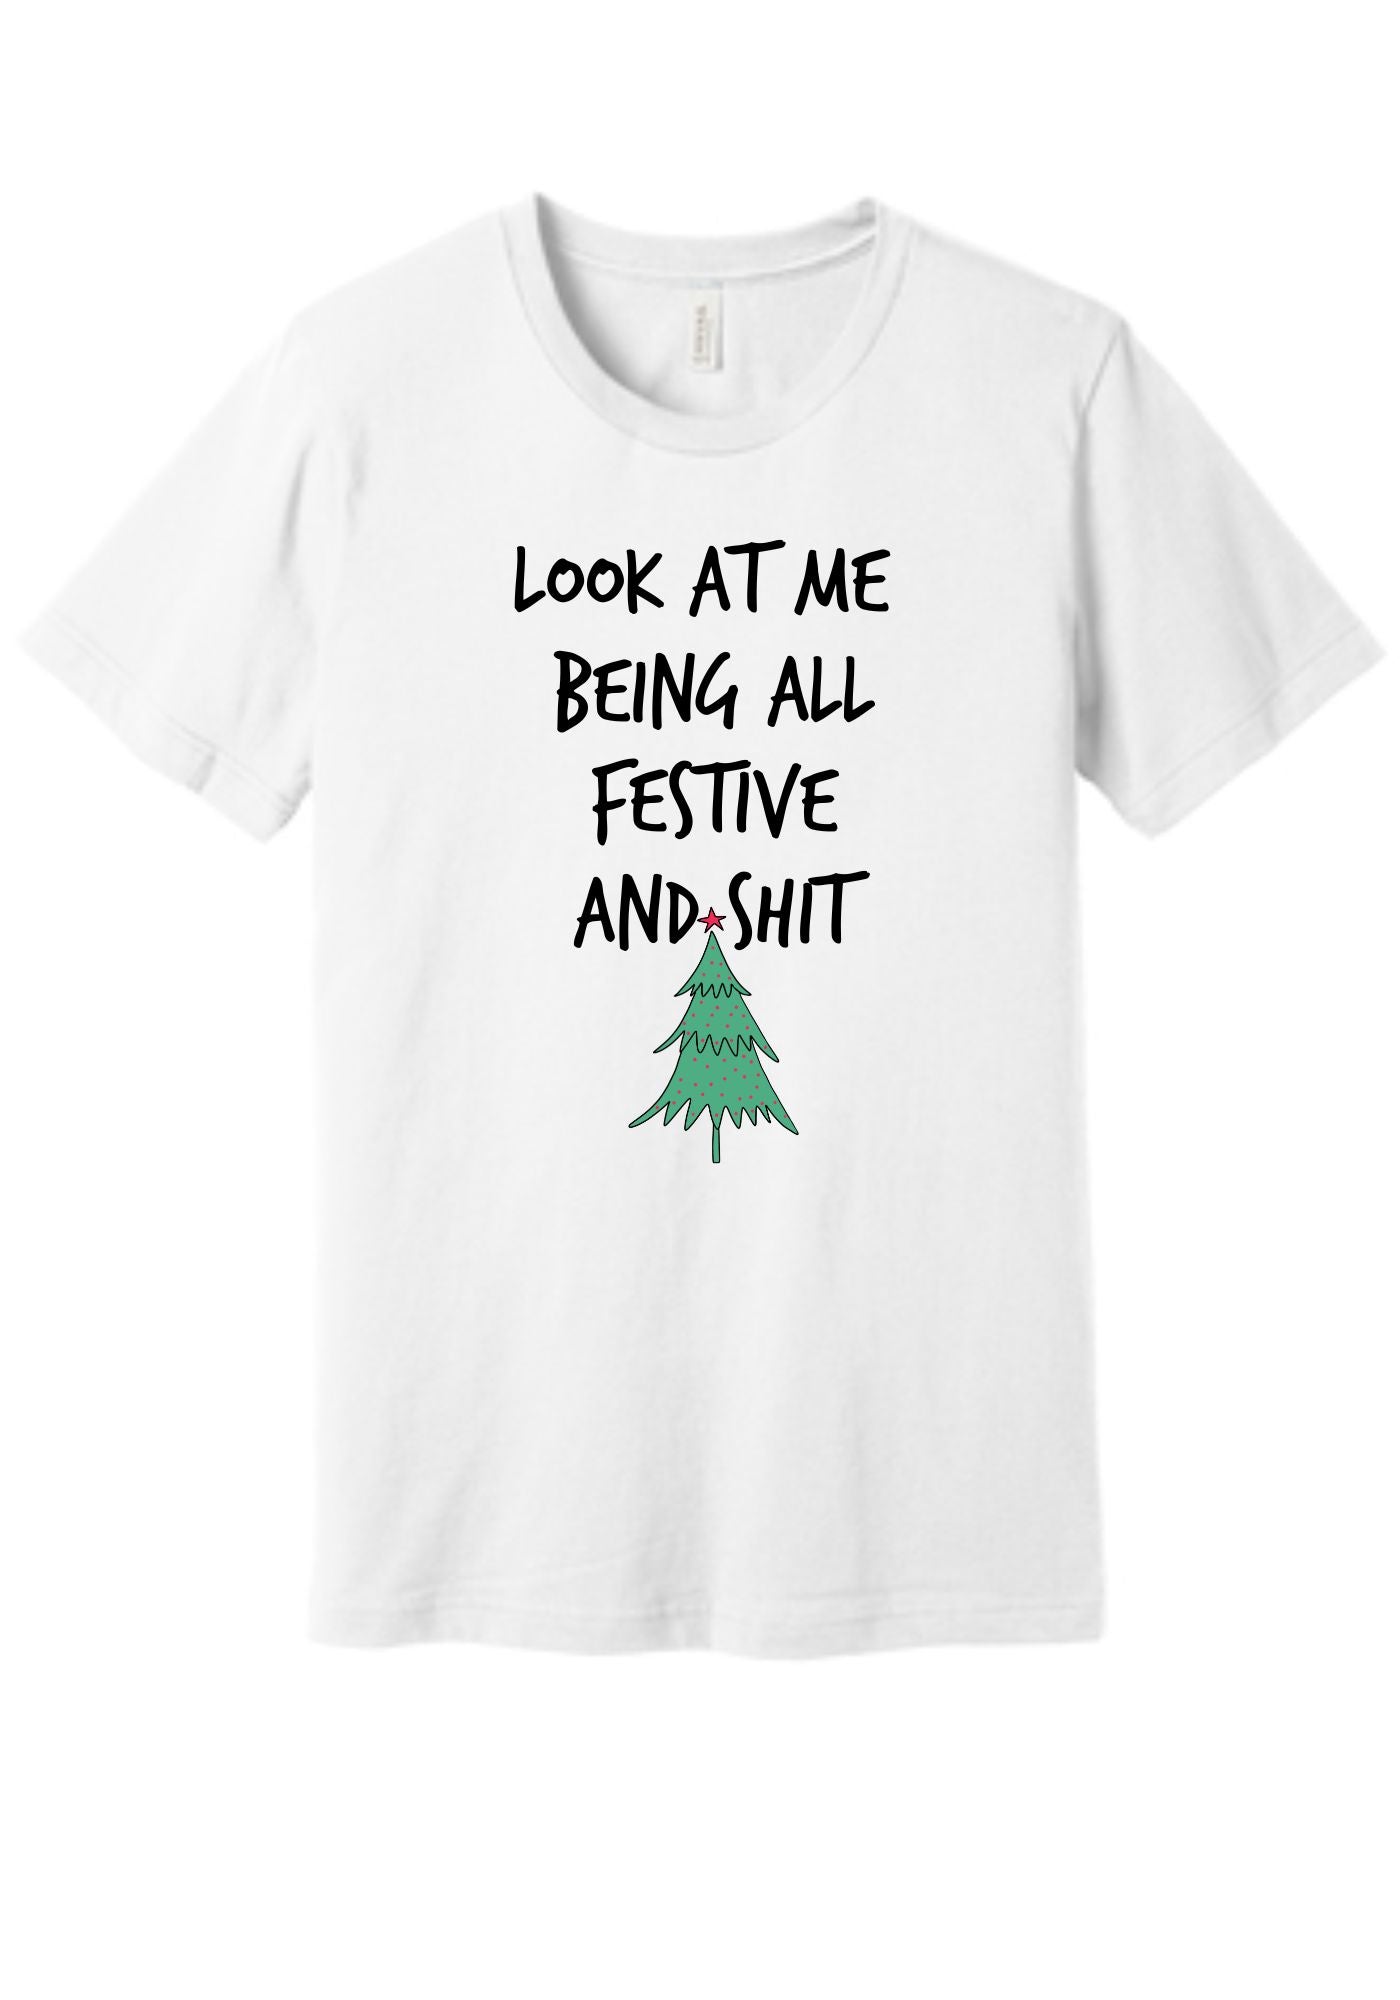 Funny Holiday tshirt - look at me being all festive and shit white cotton tee